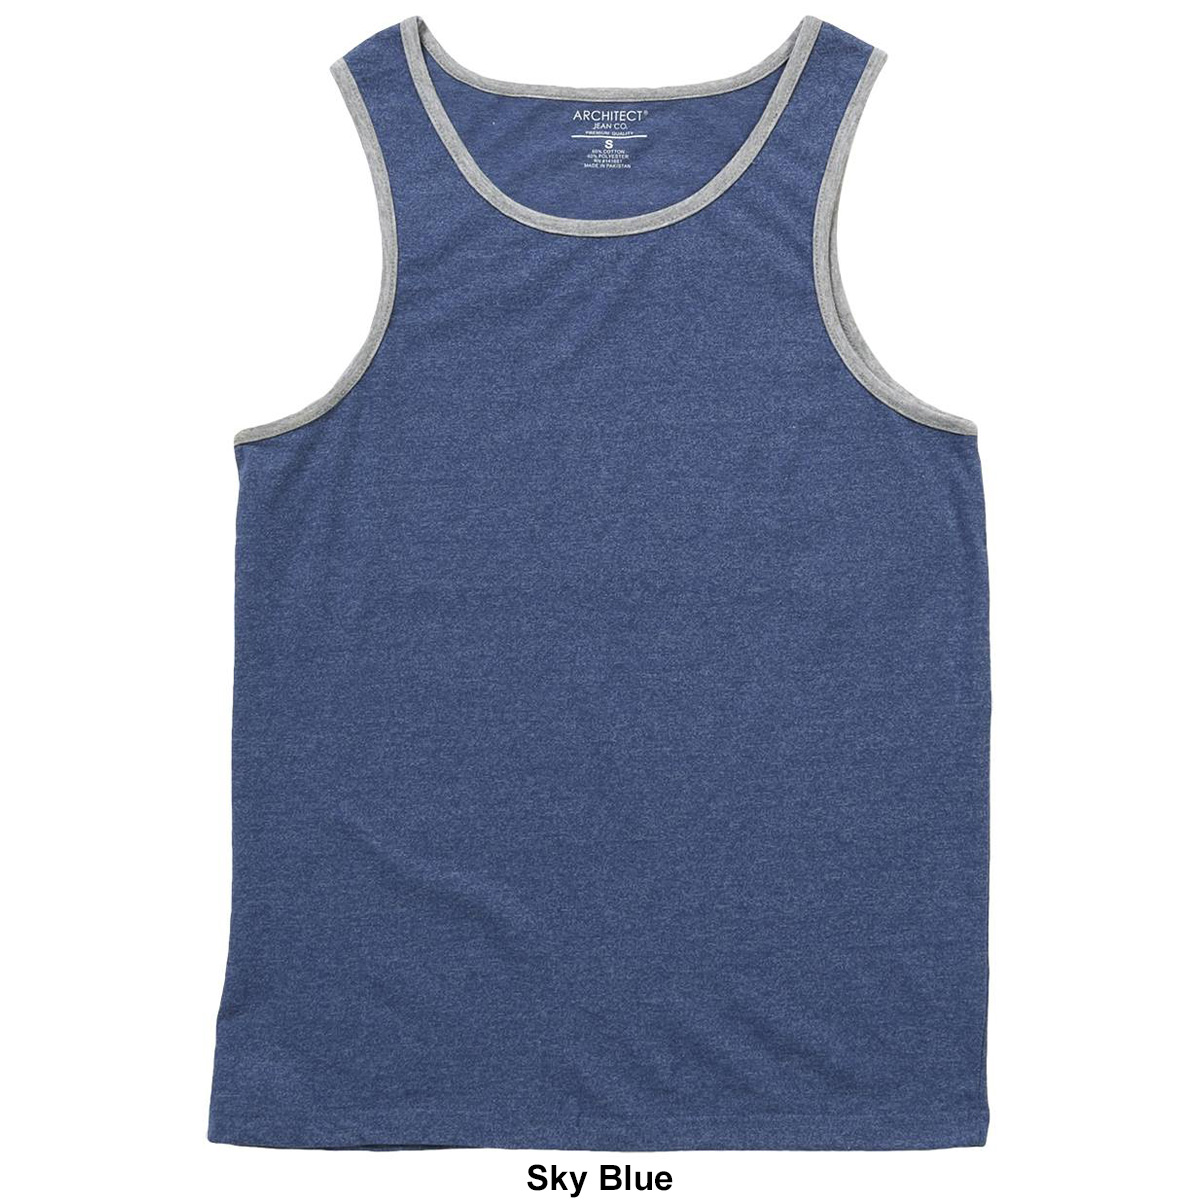 Young Mens Architect(R) Jean Co. Tank Top